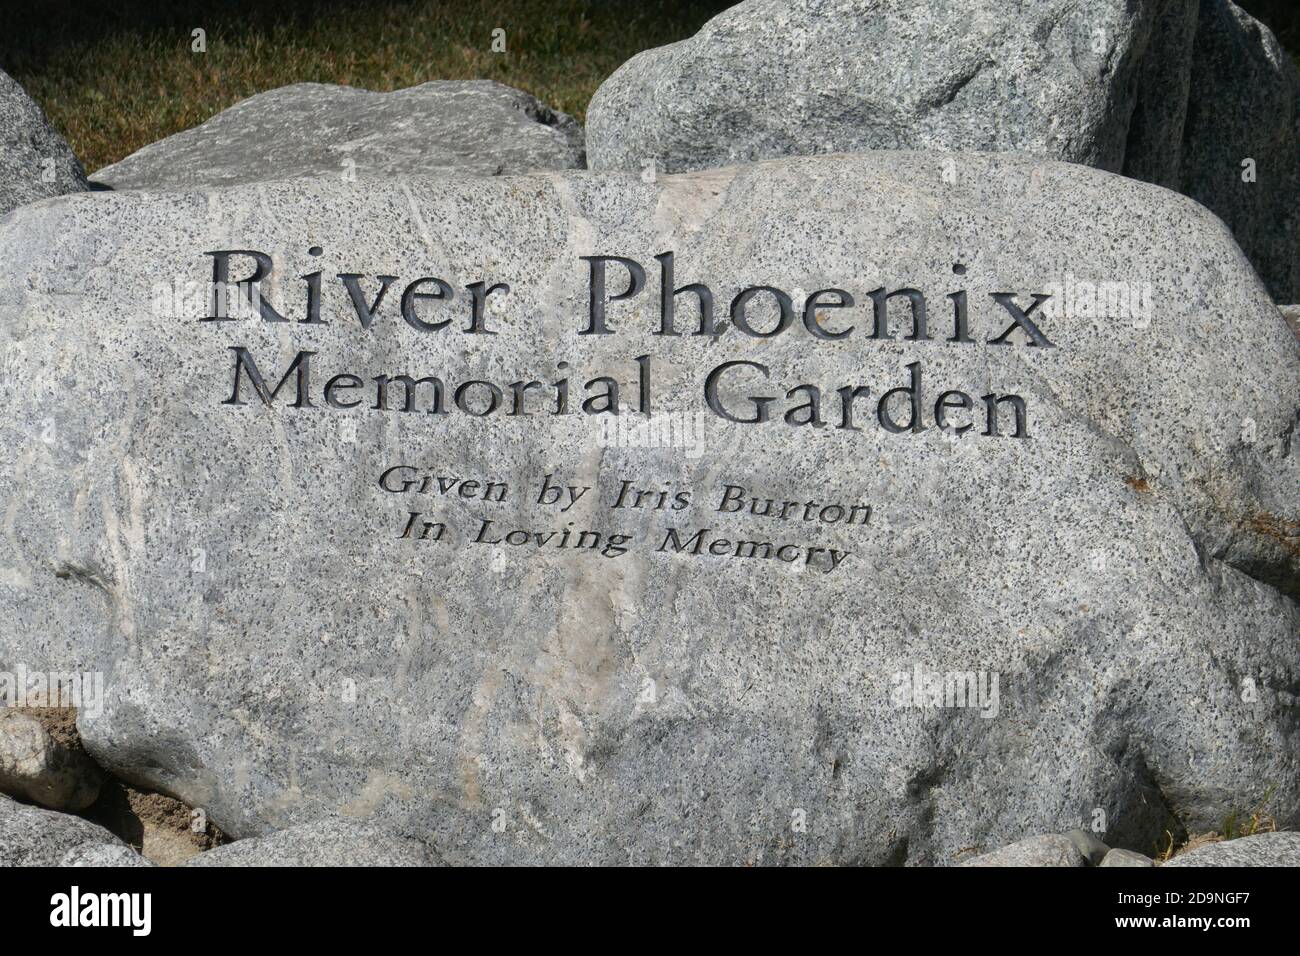 Arcadia, California, USA 4th November 2020 A general view of atmosphere of The River Phoenix Memorial Garden at The Methodist Hospital at 300 W. Huntington Drive on November 4, 2020 in Arcadia, California, USA. Photo by Barry King/Alamy Stock Photo Stock Photo